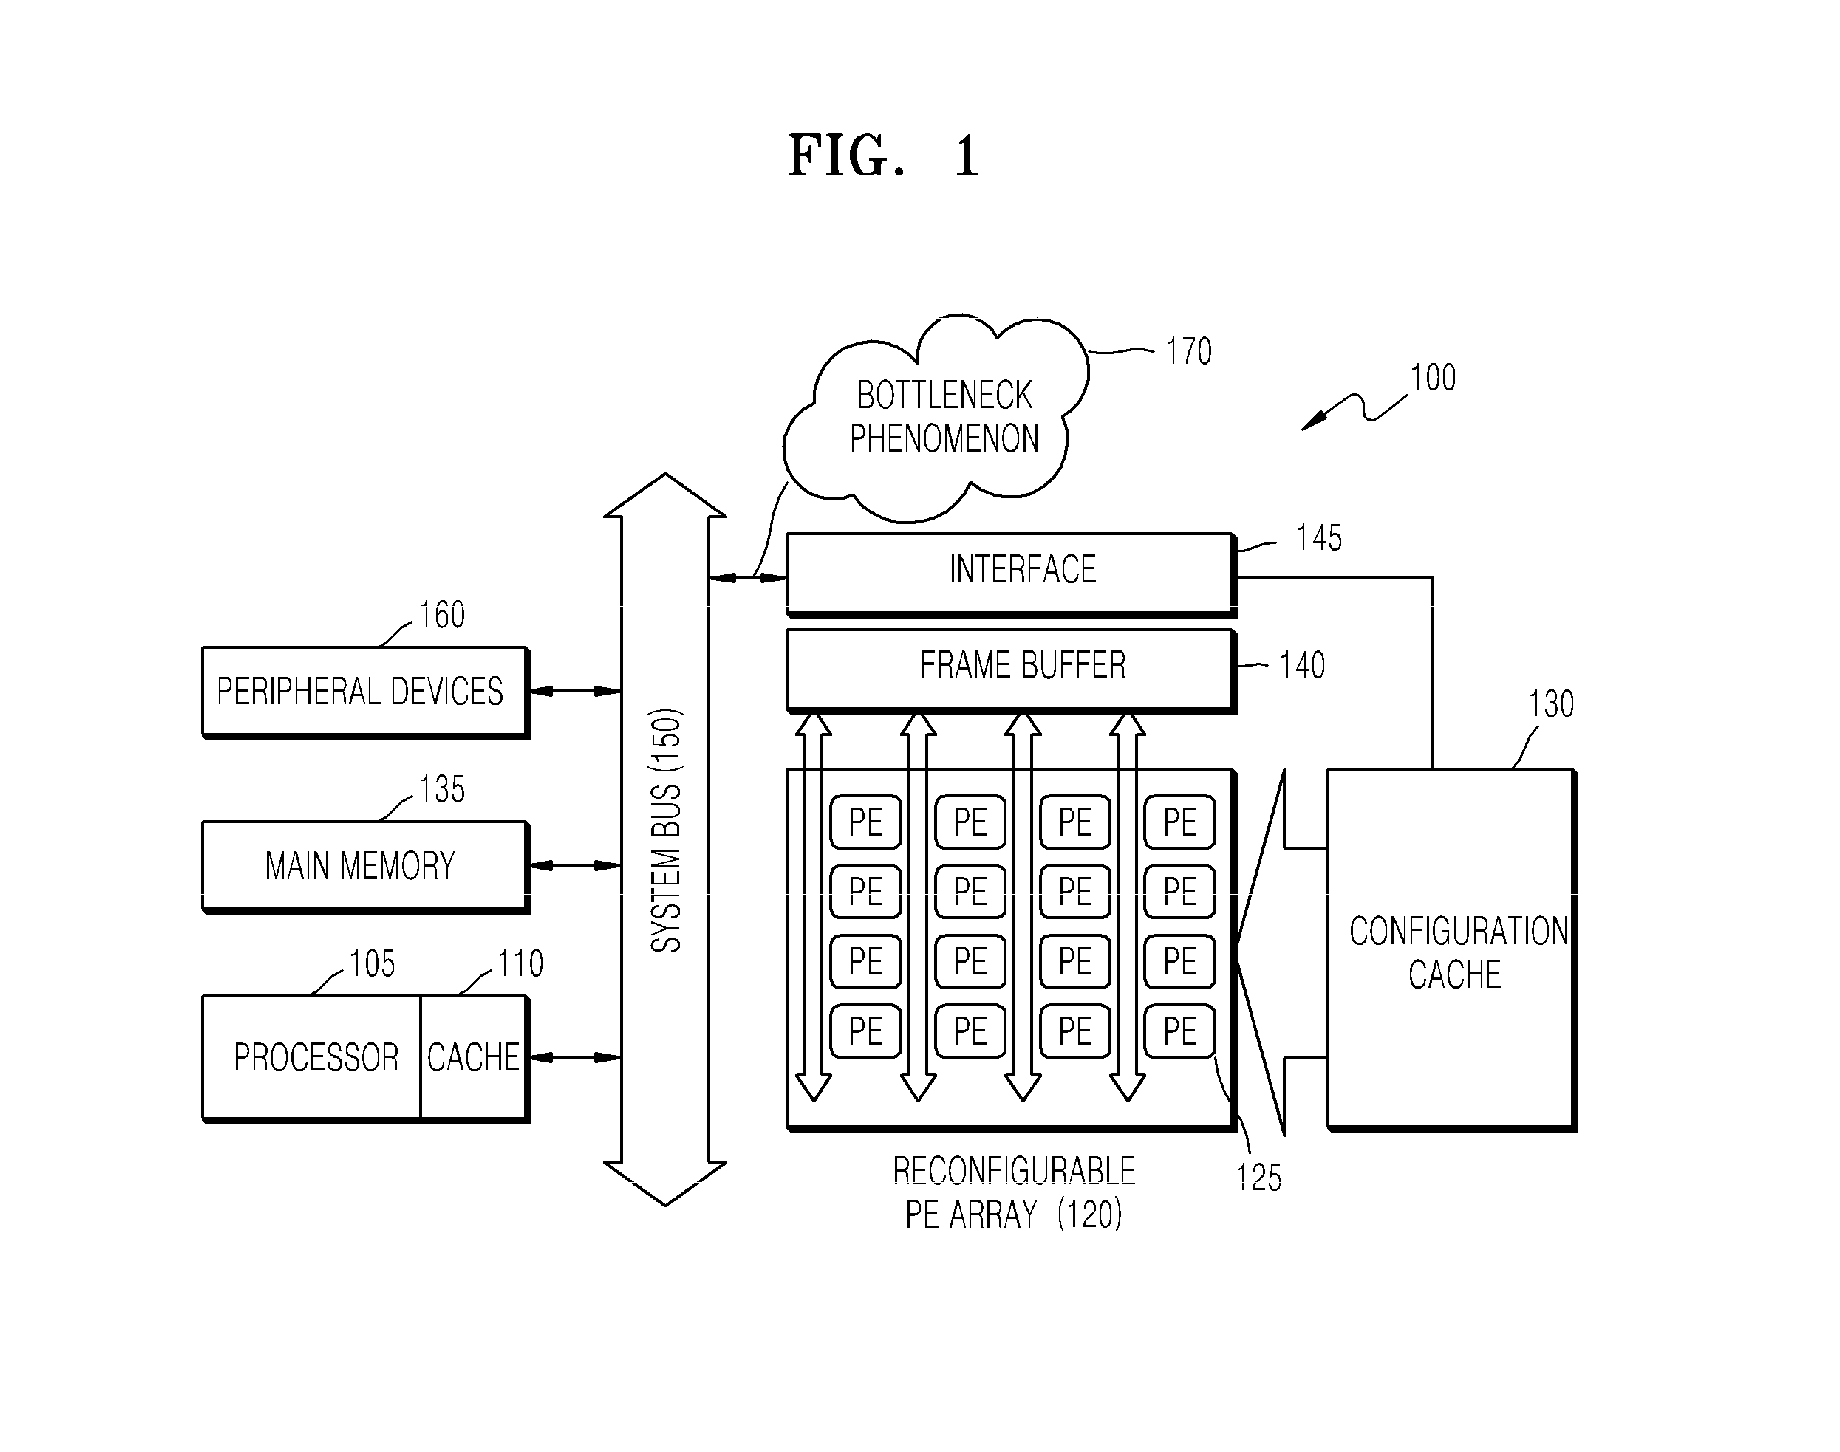 Memory-centered communication apparatus in a coarse grained reconfigurable array